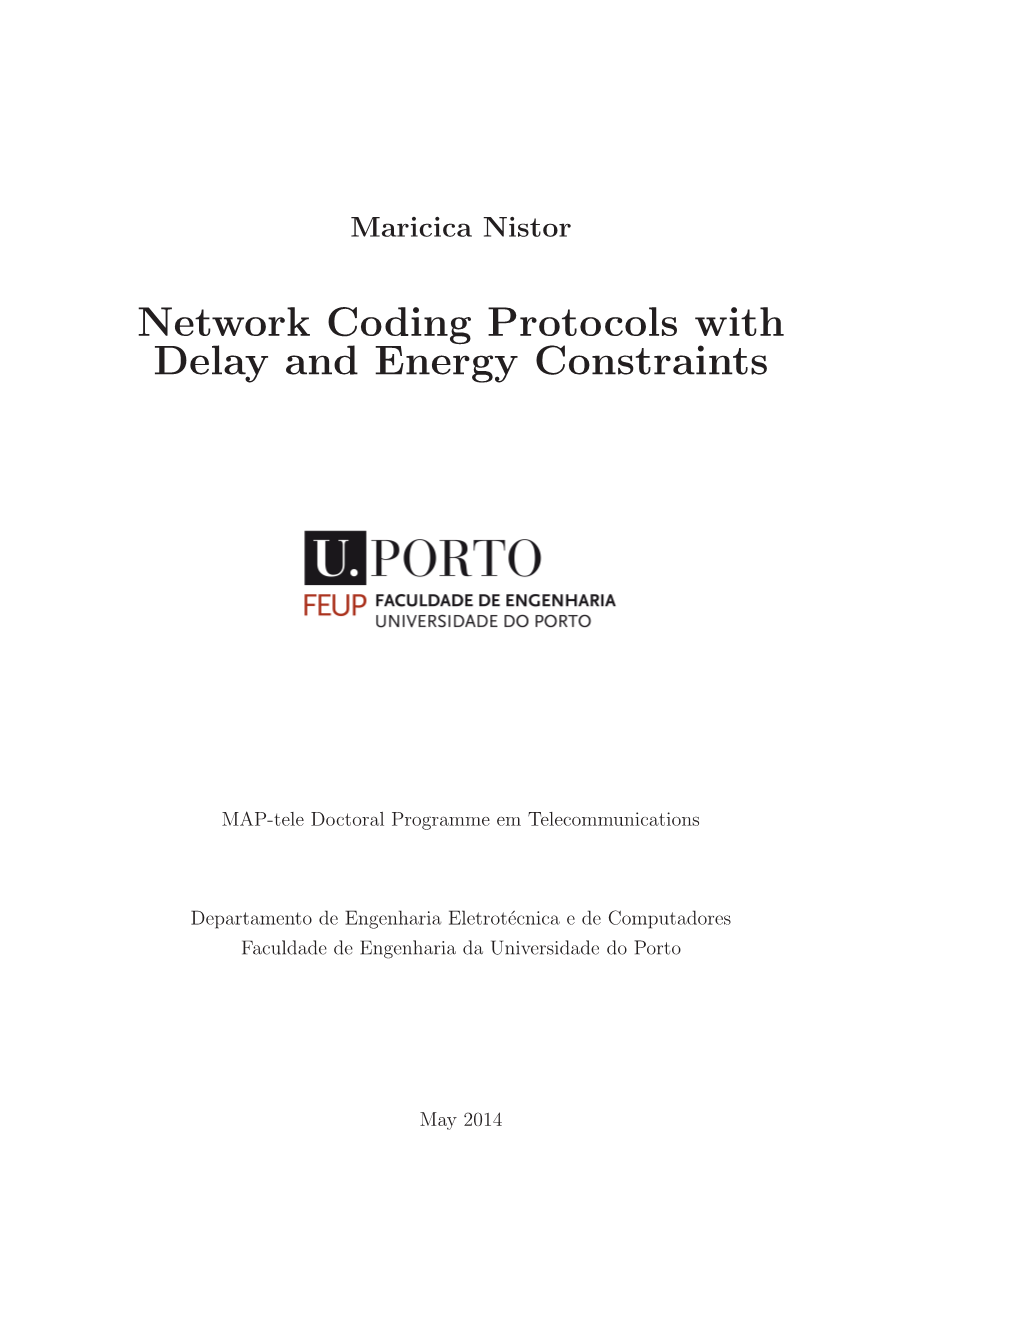 Network Coding Protocols with Delay and Energy Constraints